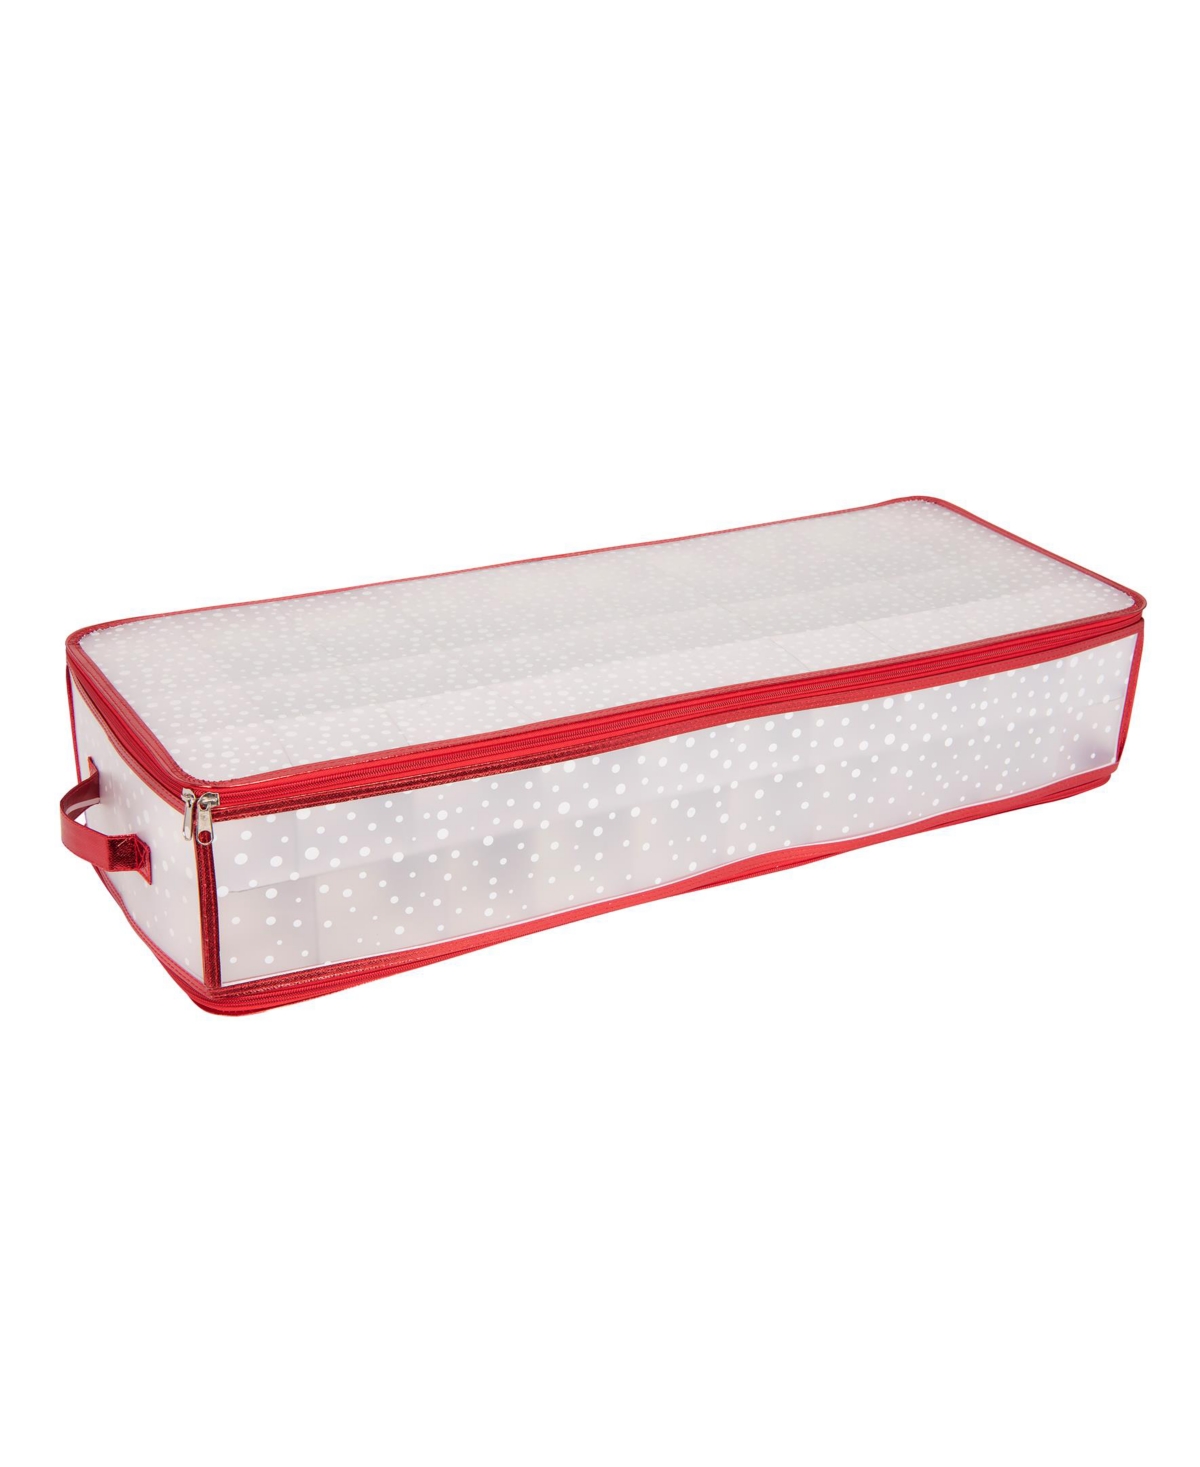 80 Count Ornament Storage Organizer in Red - Red